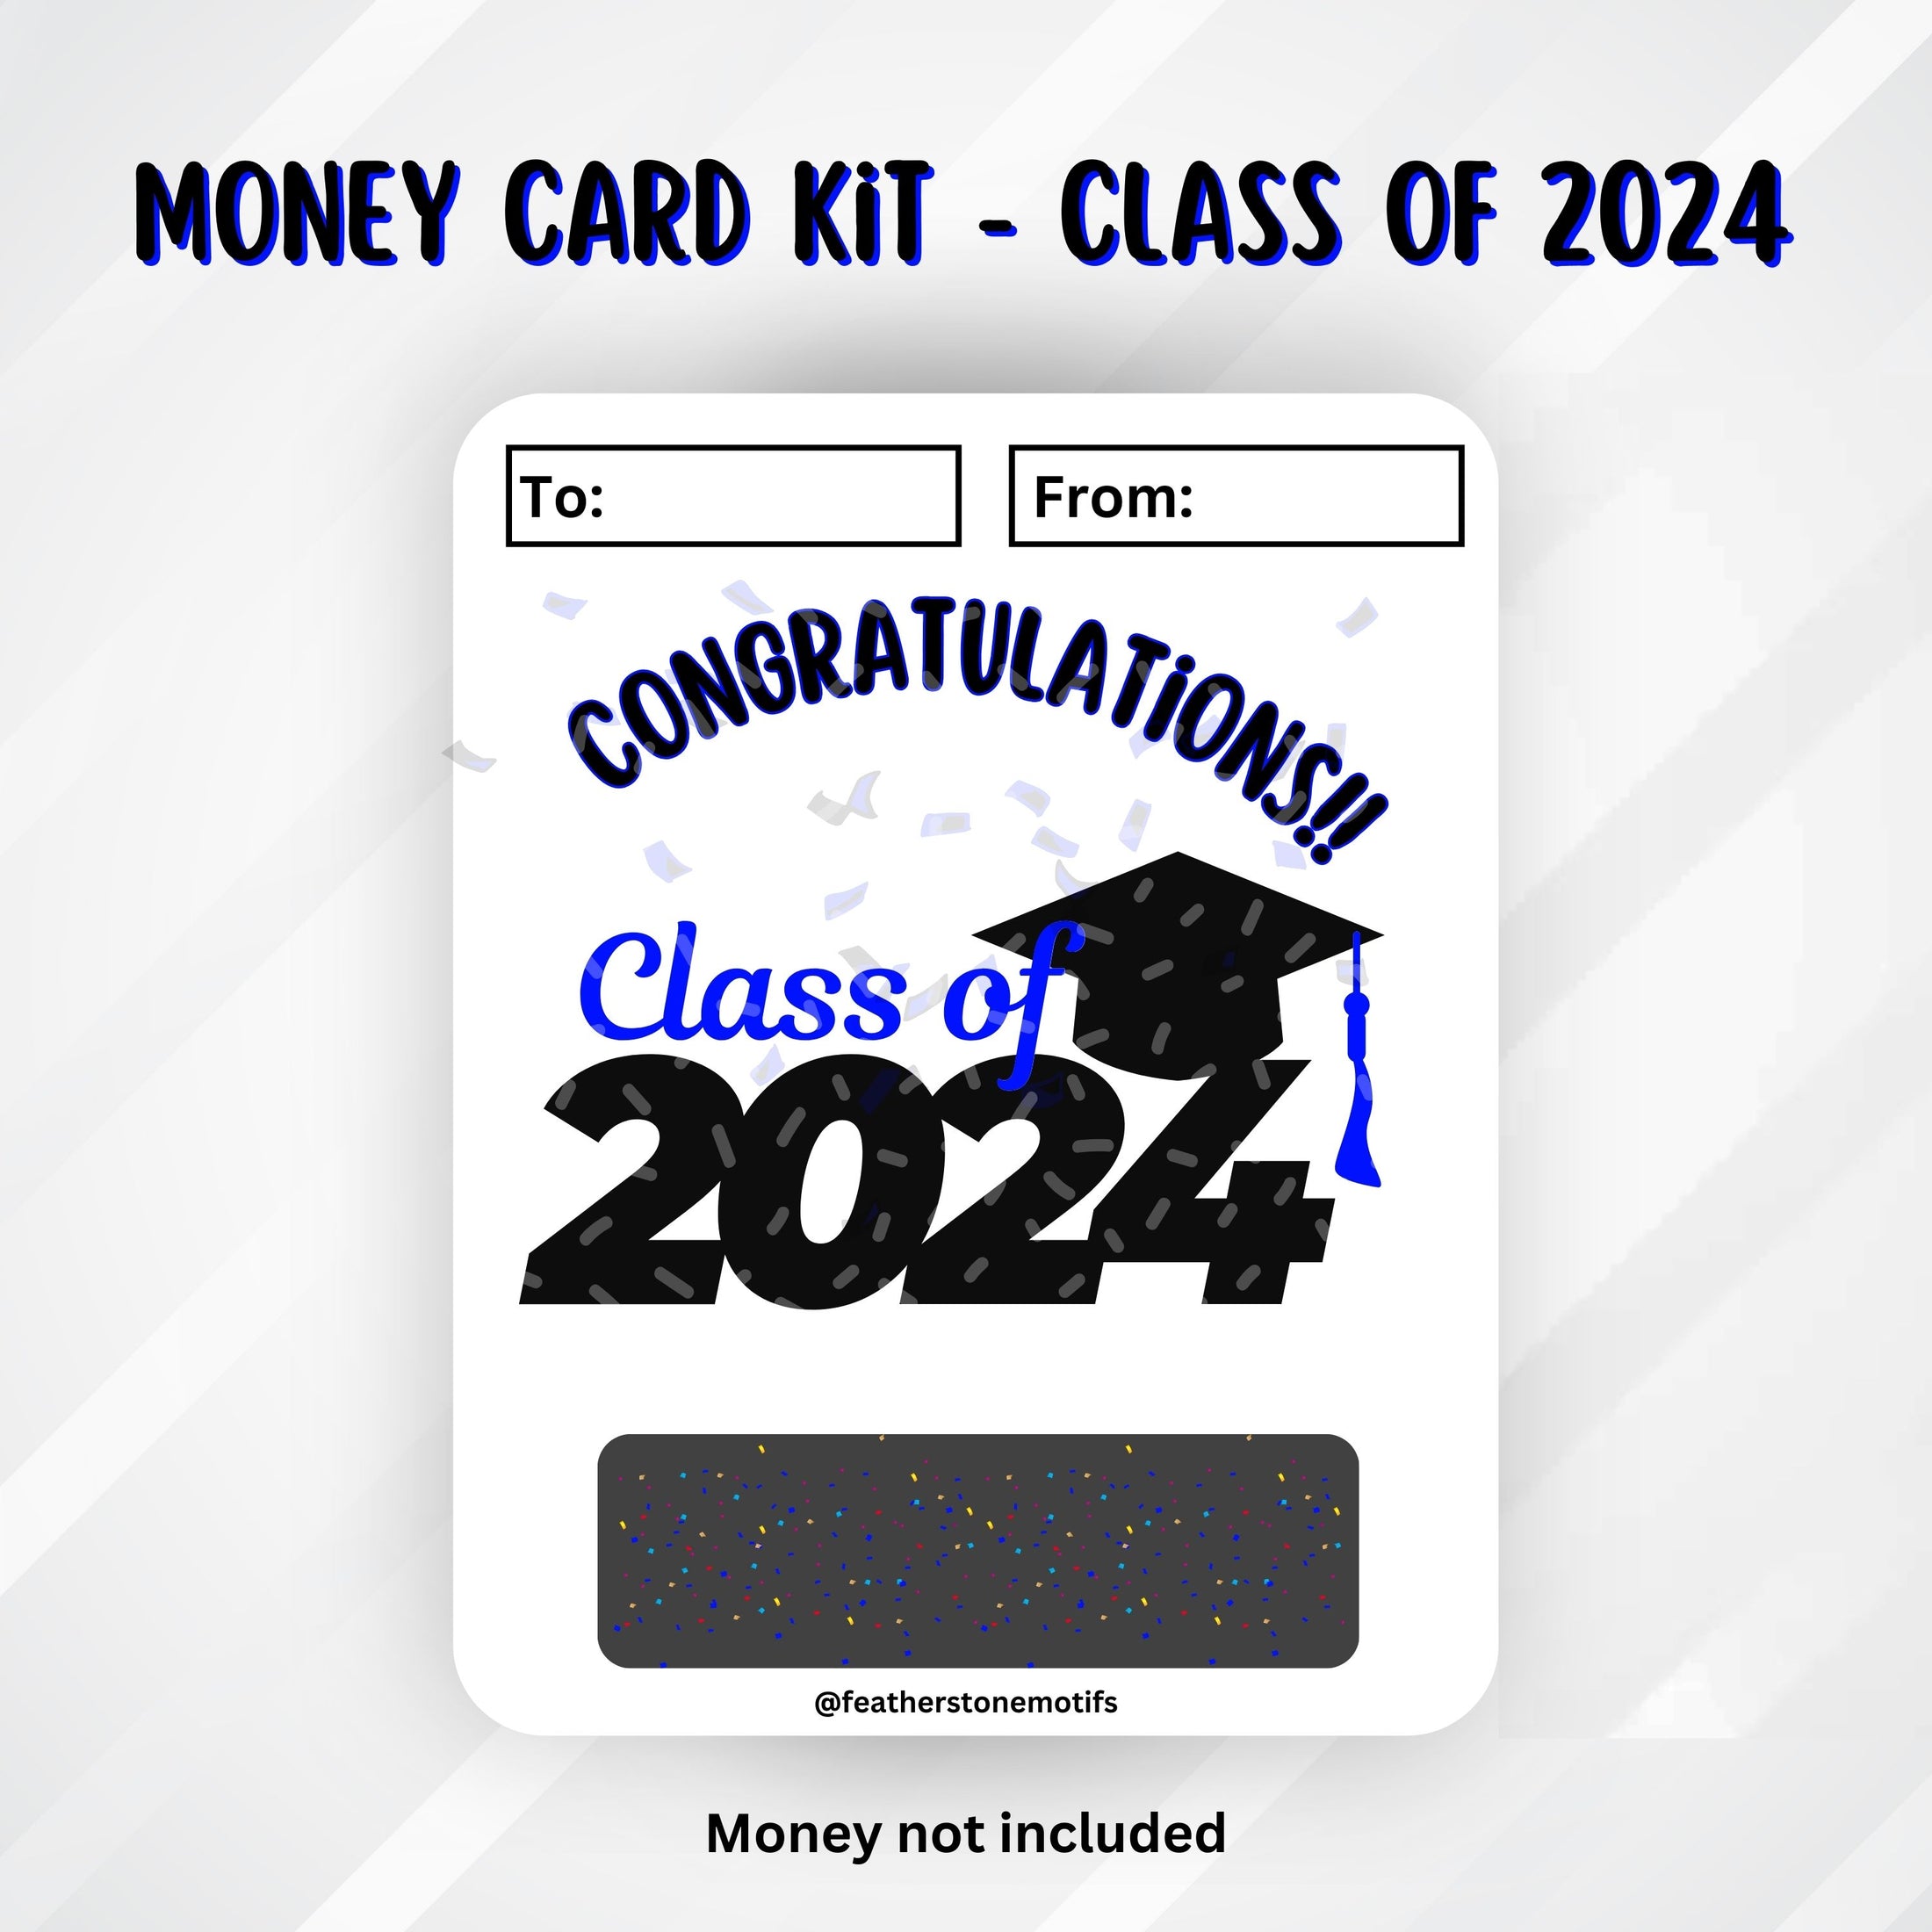 This image shows the Class of 2024 Money Card without the money tube.